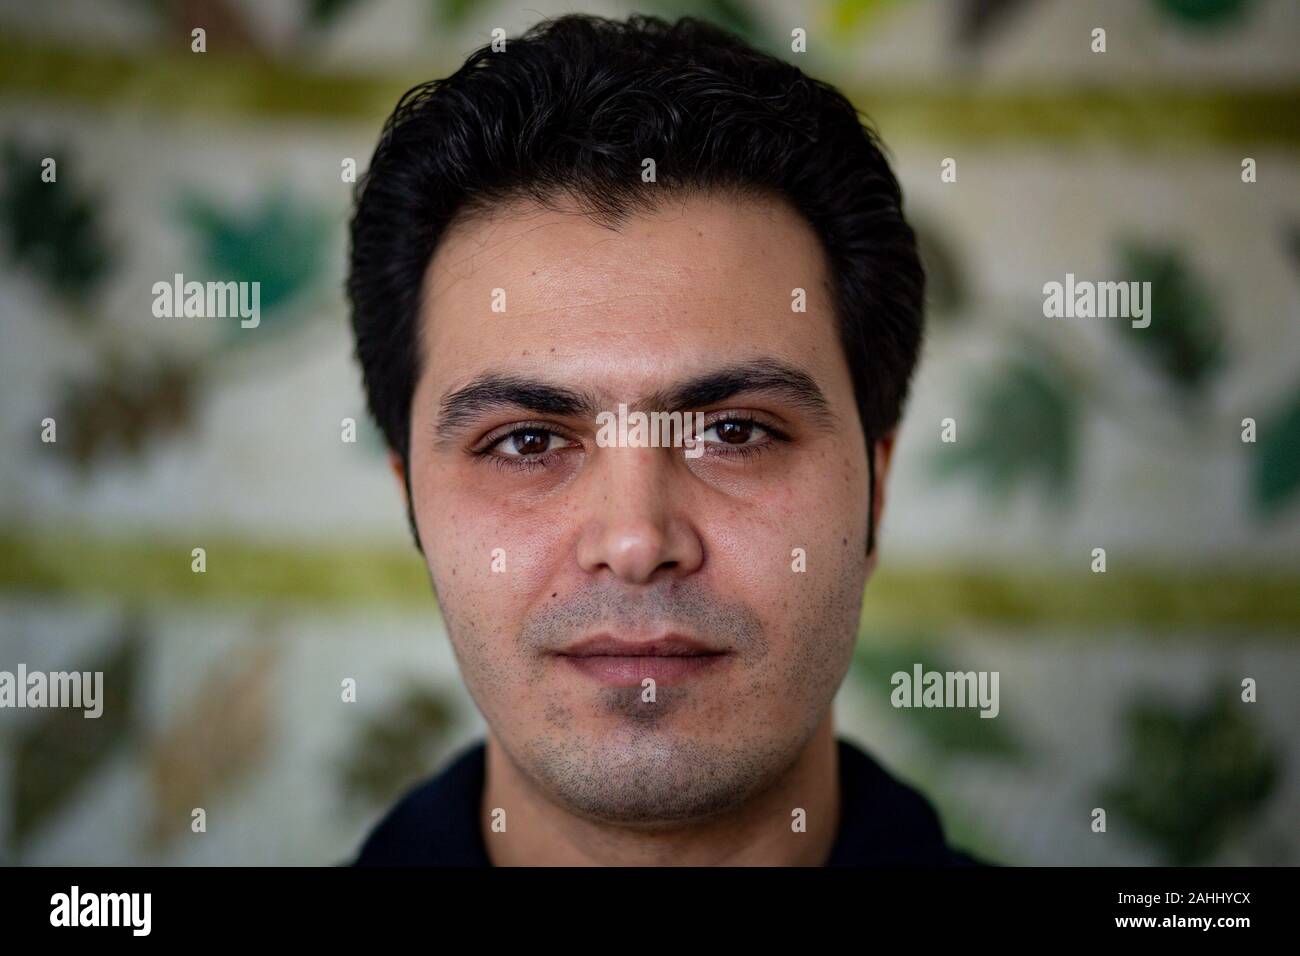 Saman, an Iranian refugee rebuilding his life in the UK, who has described how he fled torture and risked his life in a refrigerated lorry to reach safety. The 35-year-old has spoken publicly about his ordeal for the first time as he thanked charity workers for helping him on the road to recovery. Stock Photo